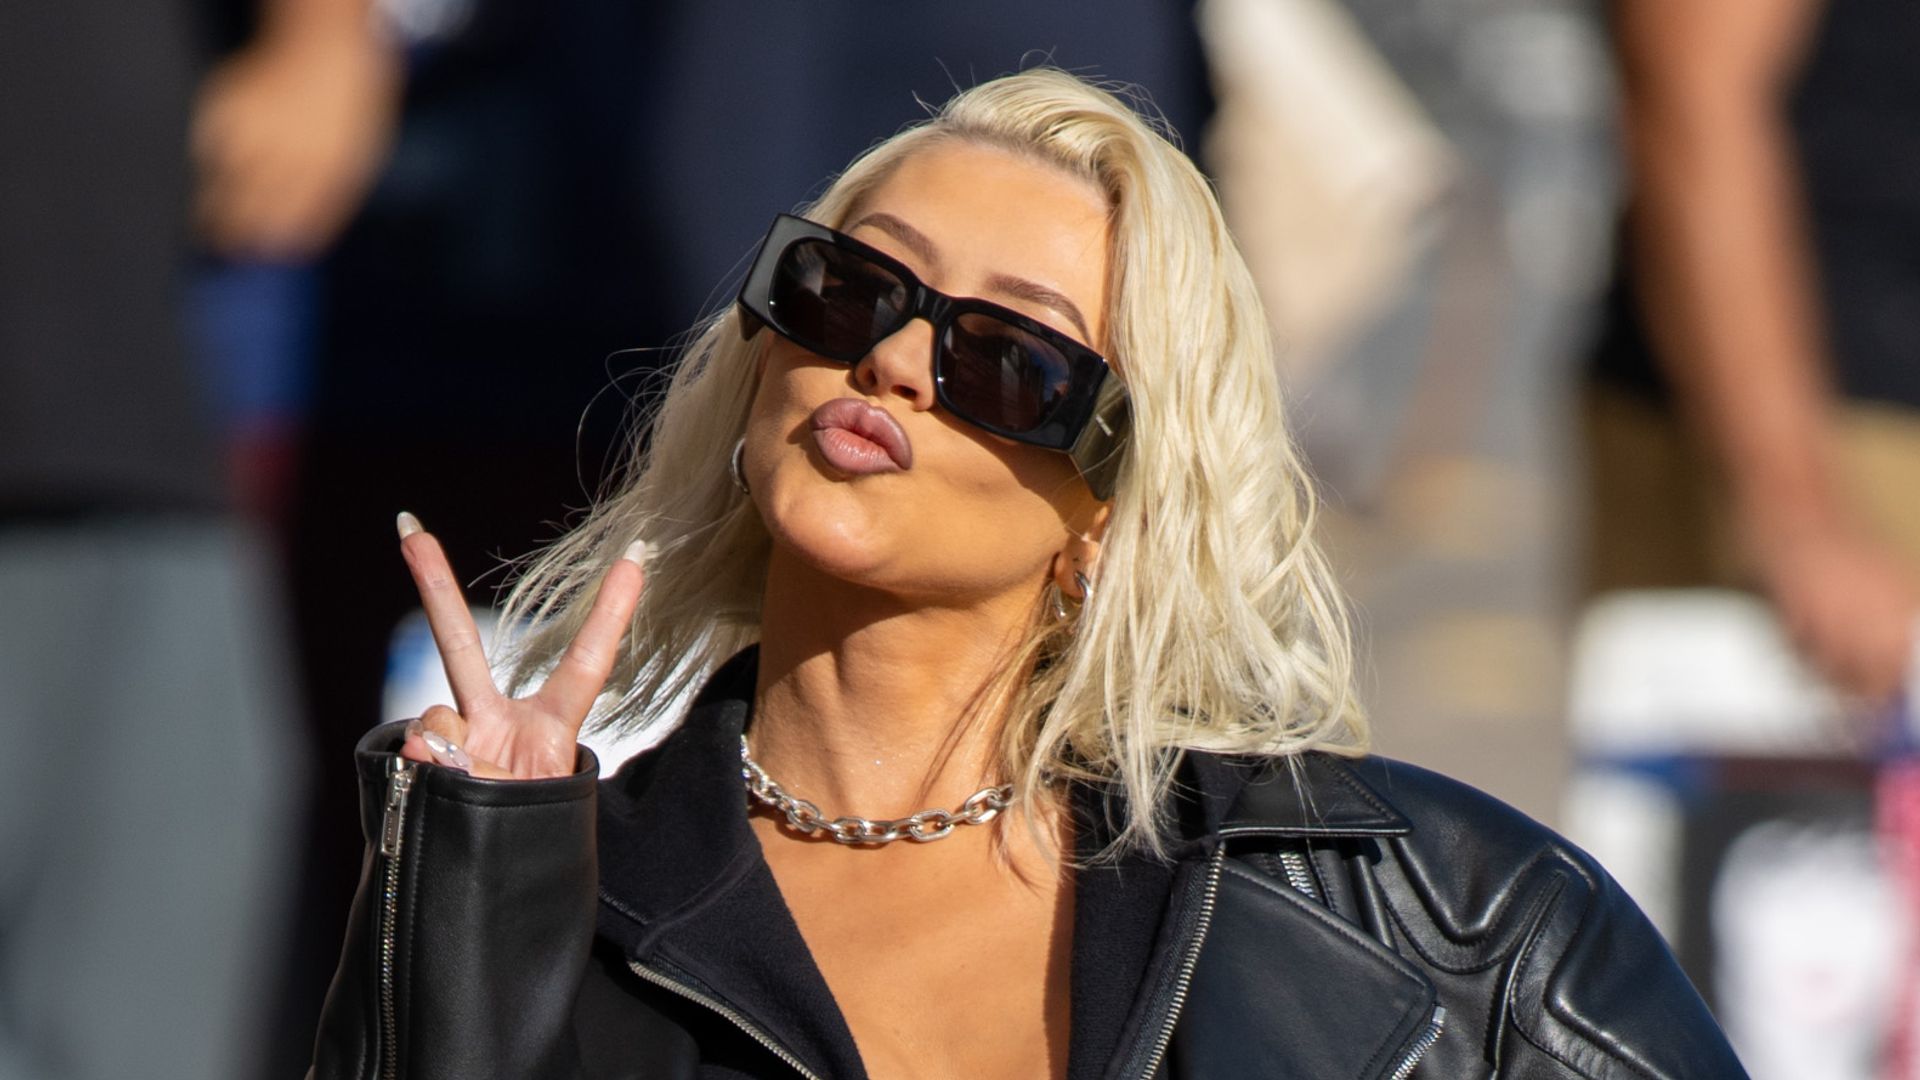 Christina Aguilera making a peace sign in black leather outfit